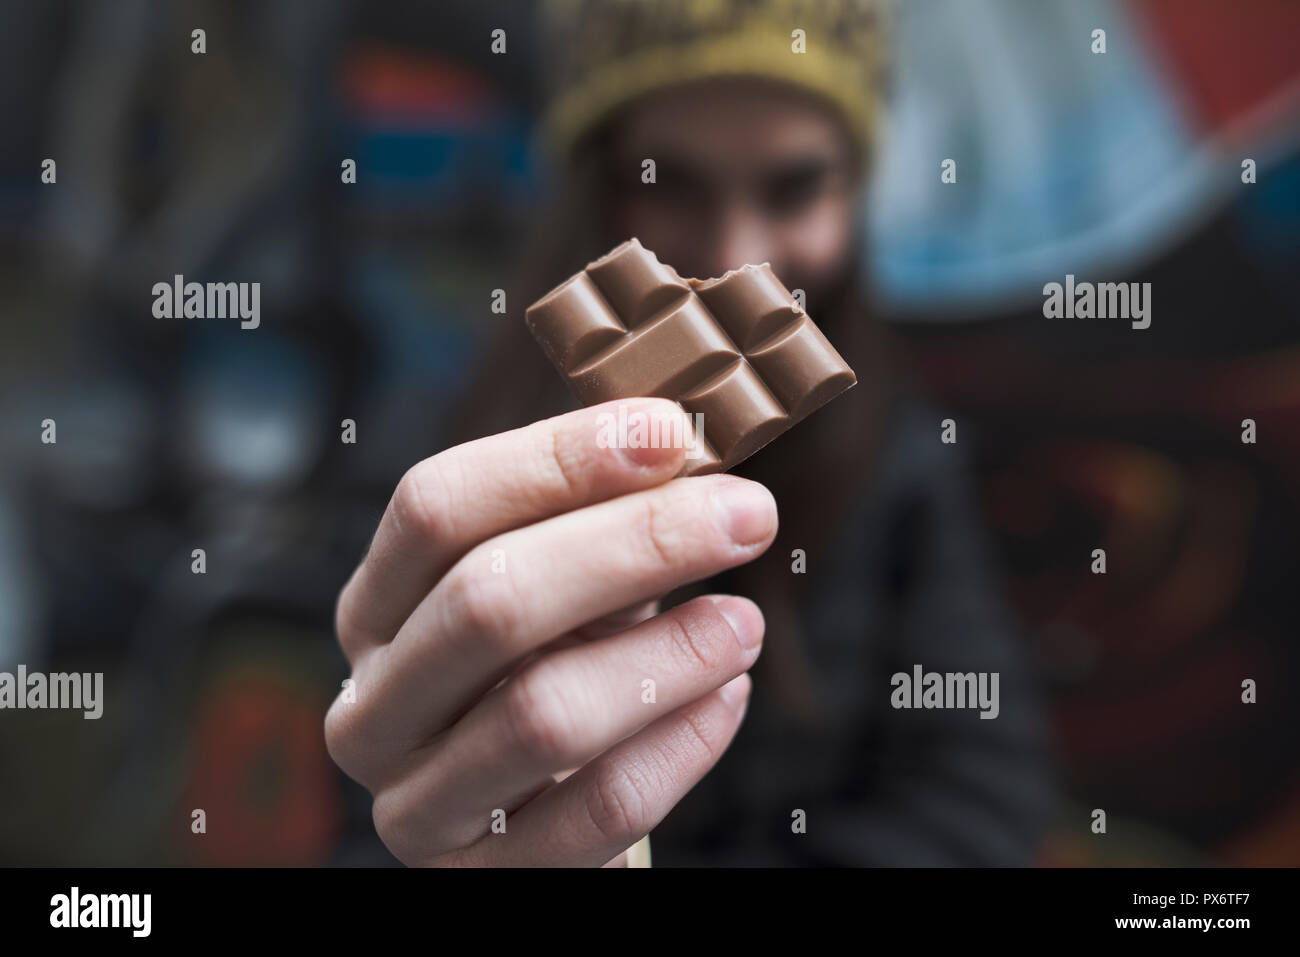 close up on a woman's hands holding a bitten piece of chocolate bar Stock Photo